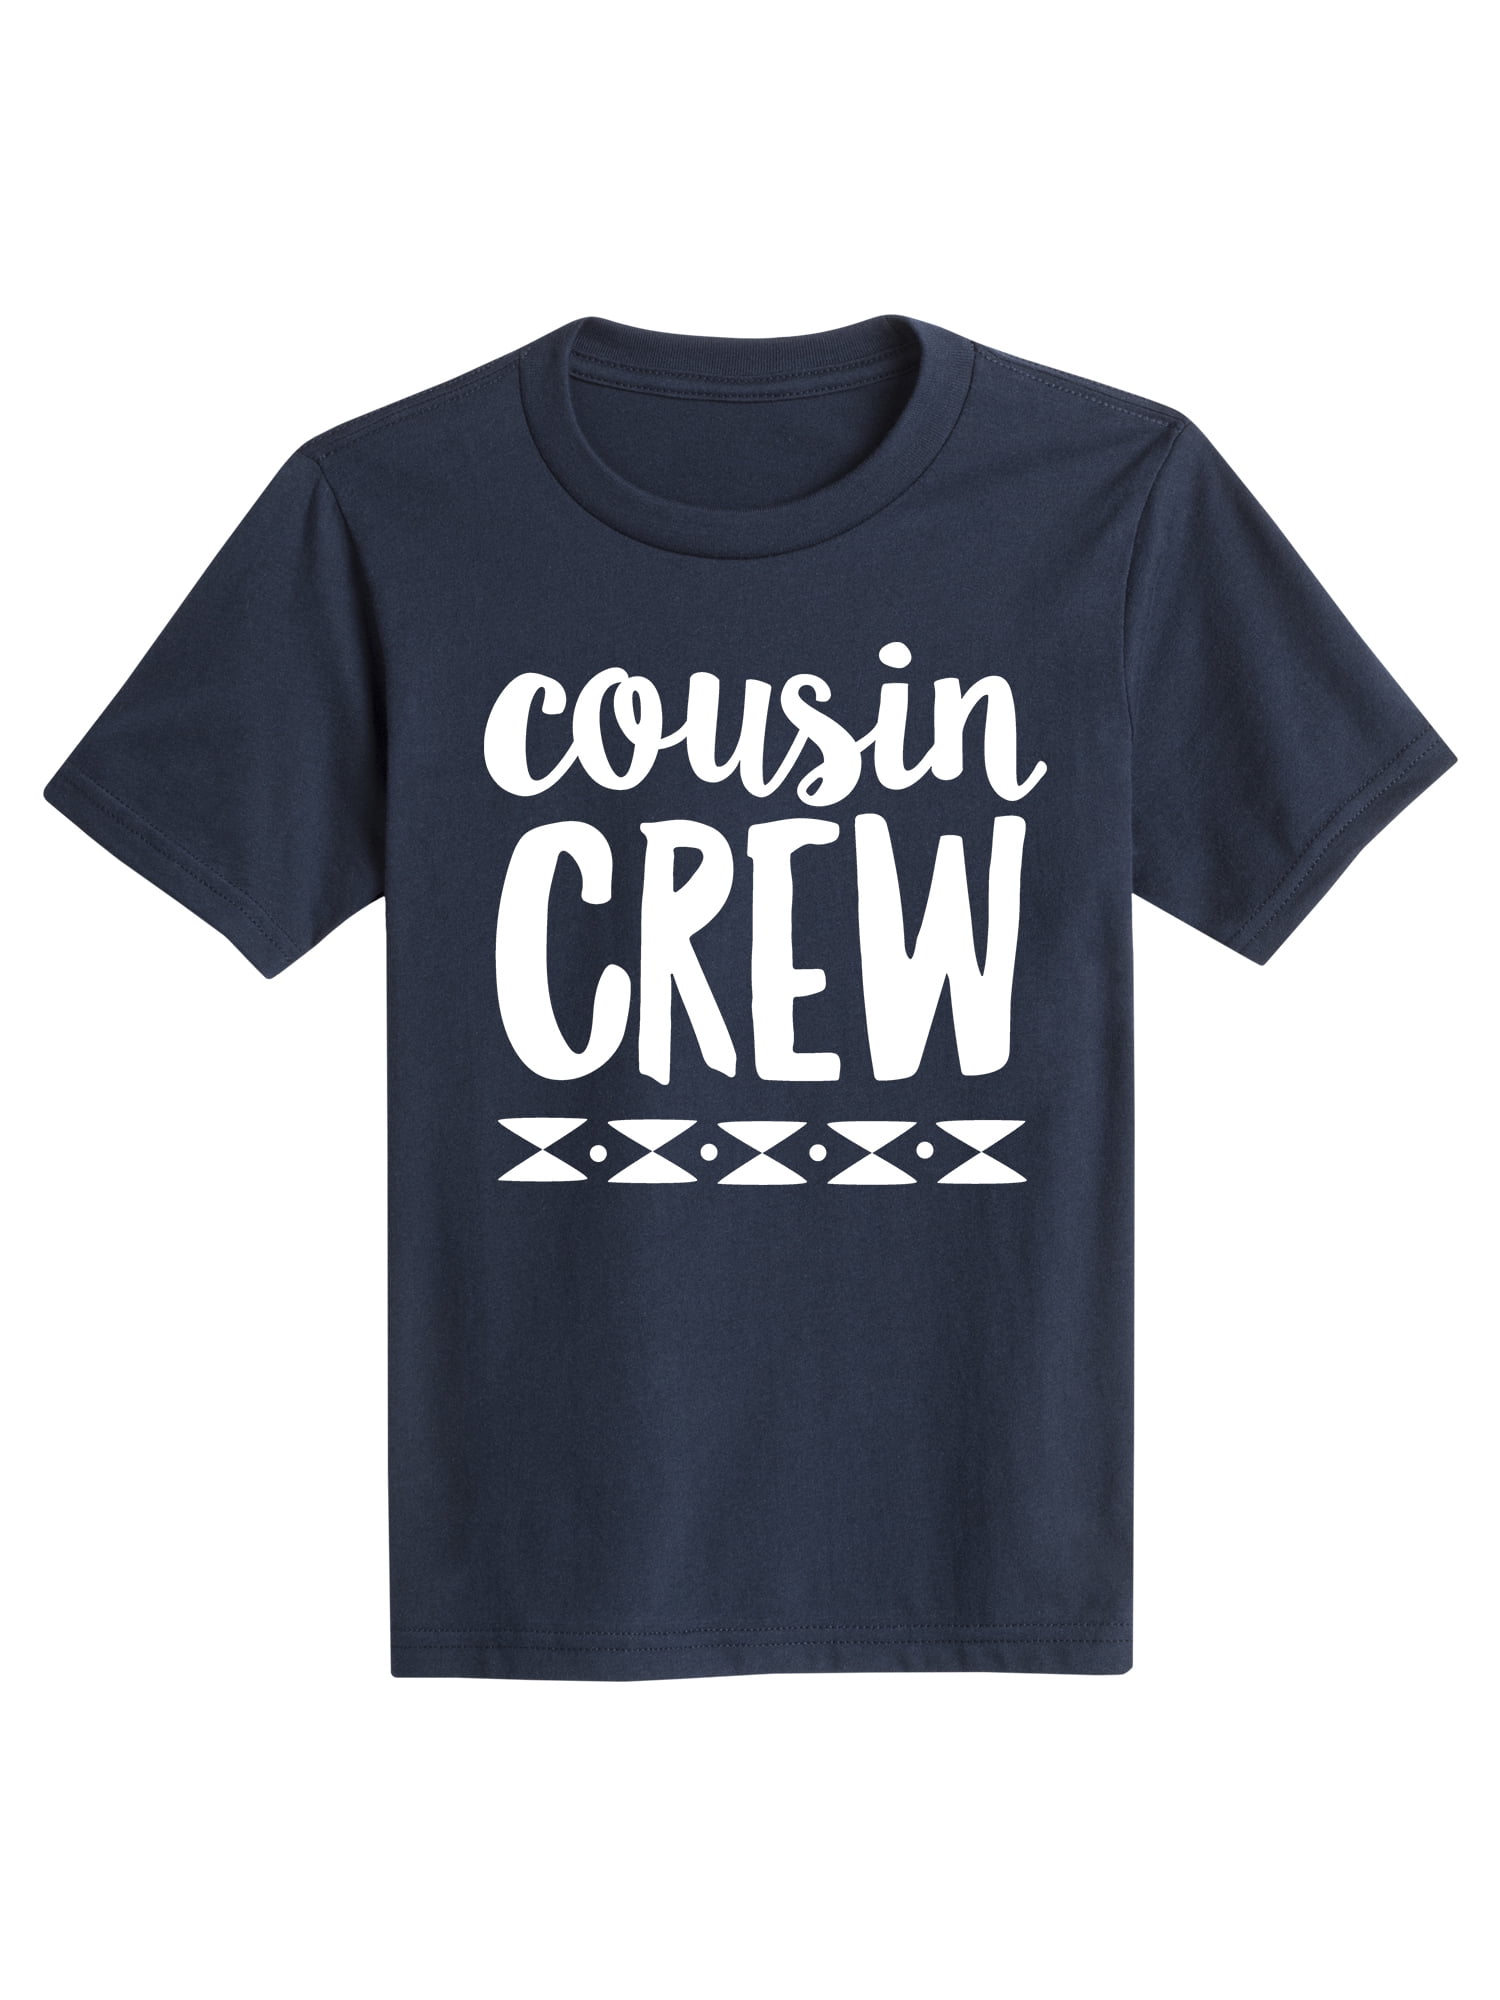 Instant Message - Cousin Crew Wt - Youth Short Sleeve Tee - Walmart.com ...